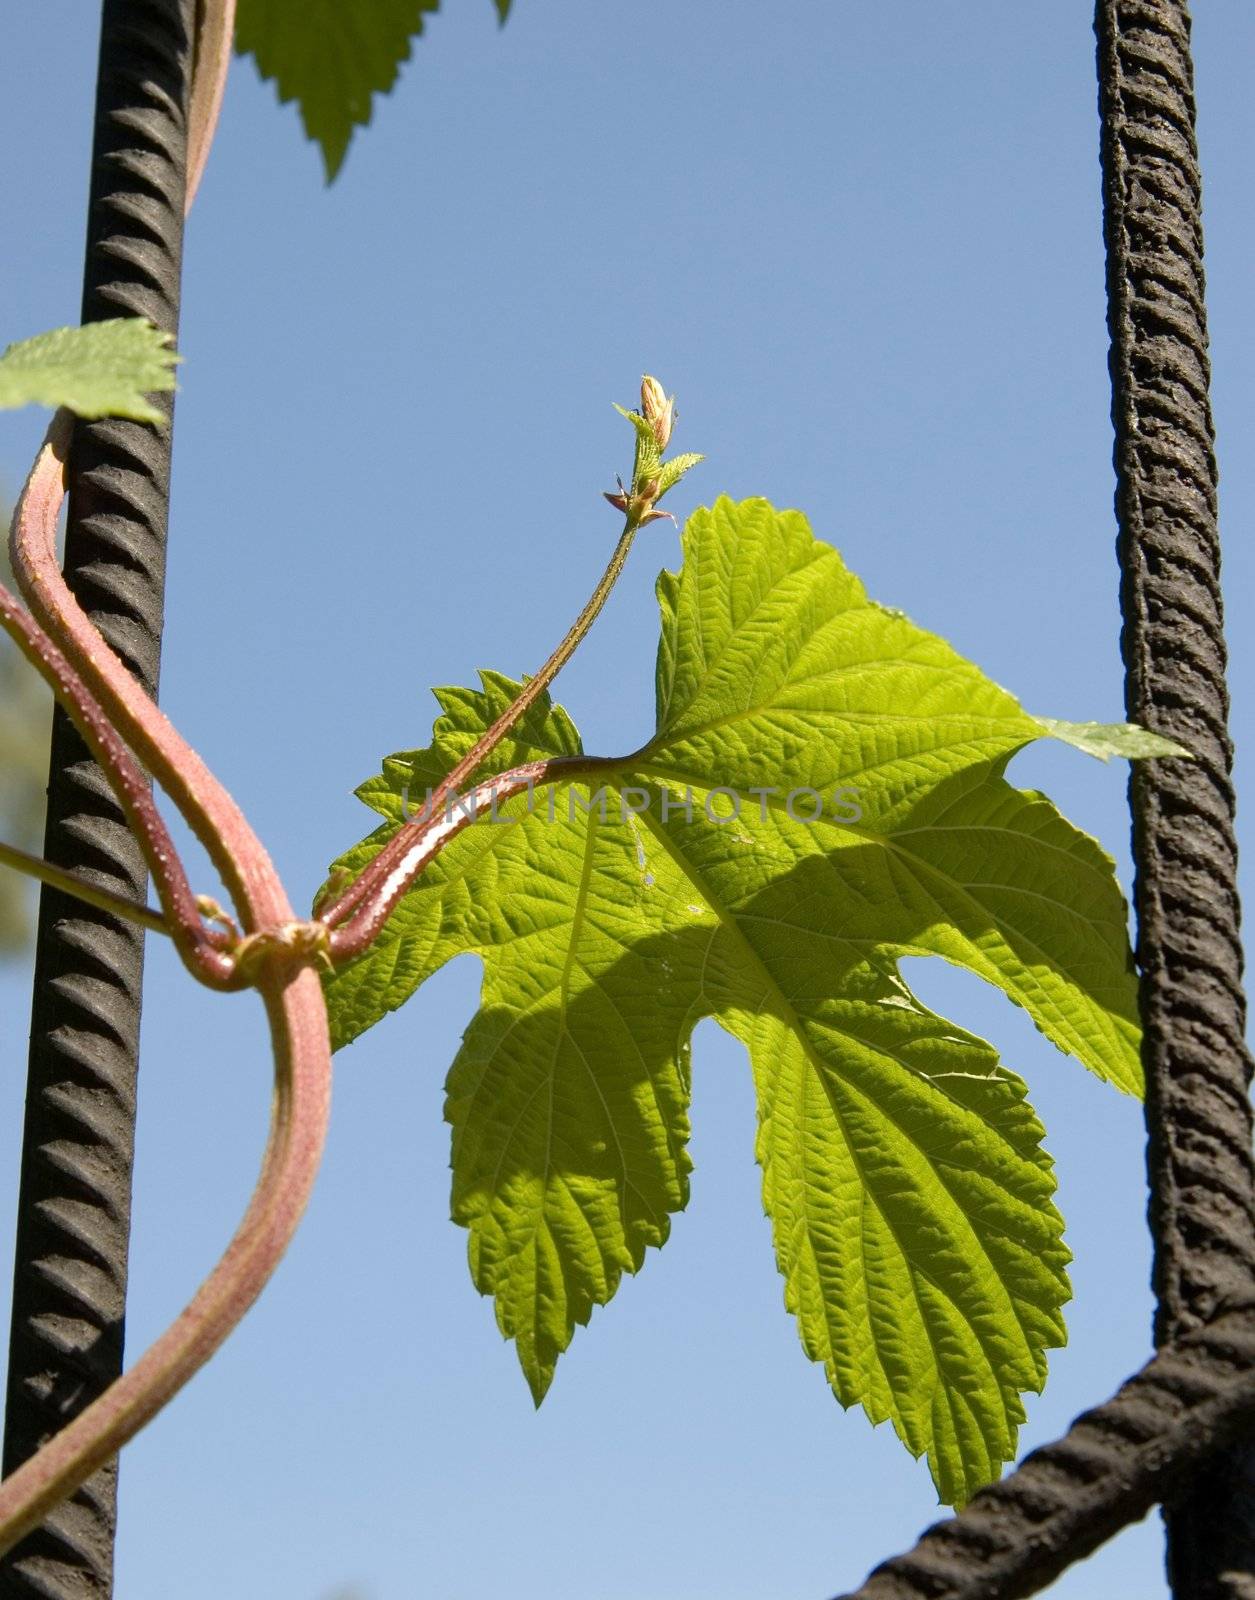 Leaf of ivy on rods of an iron lattice